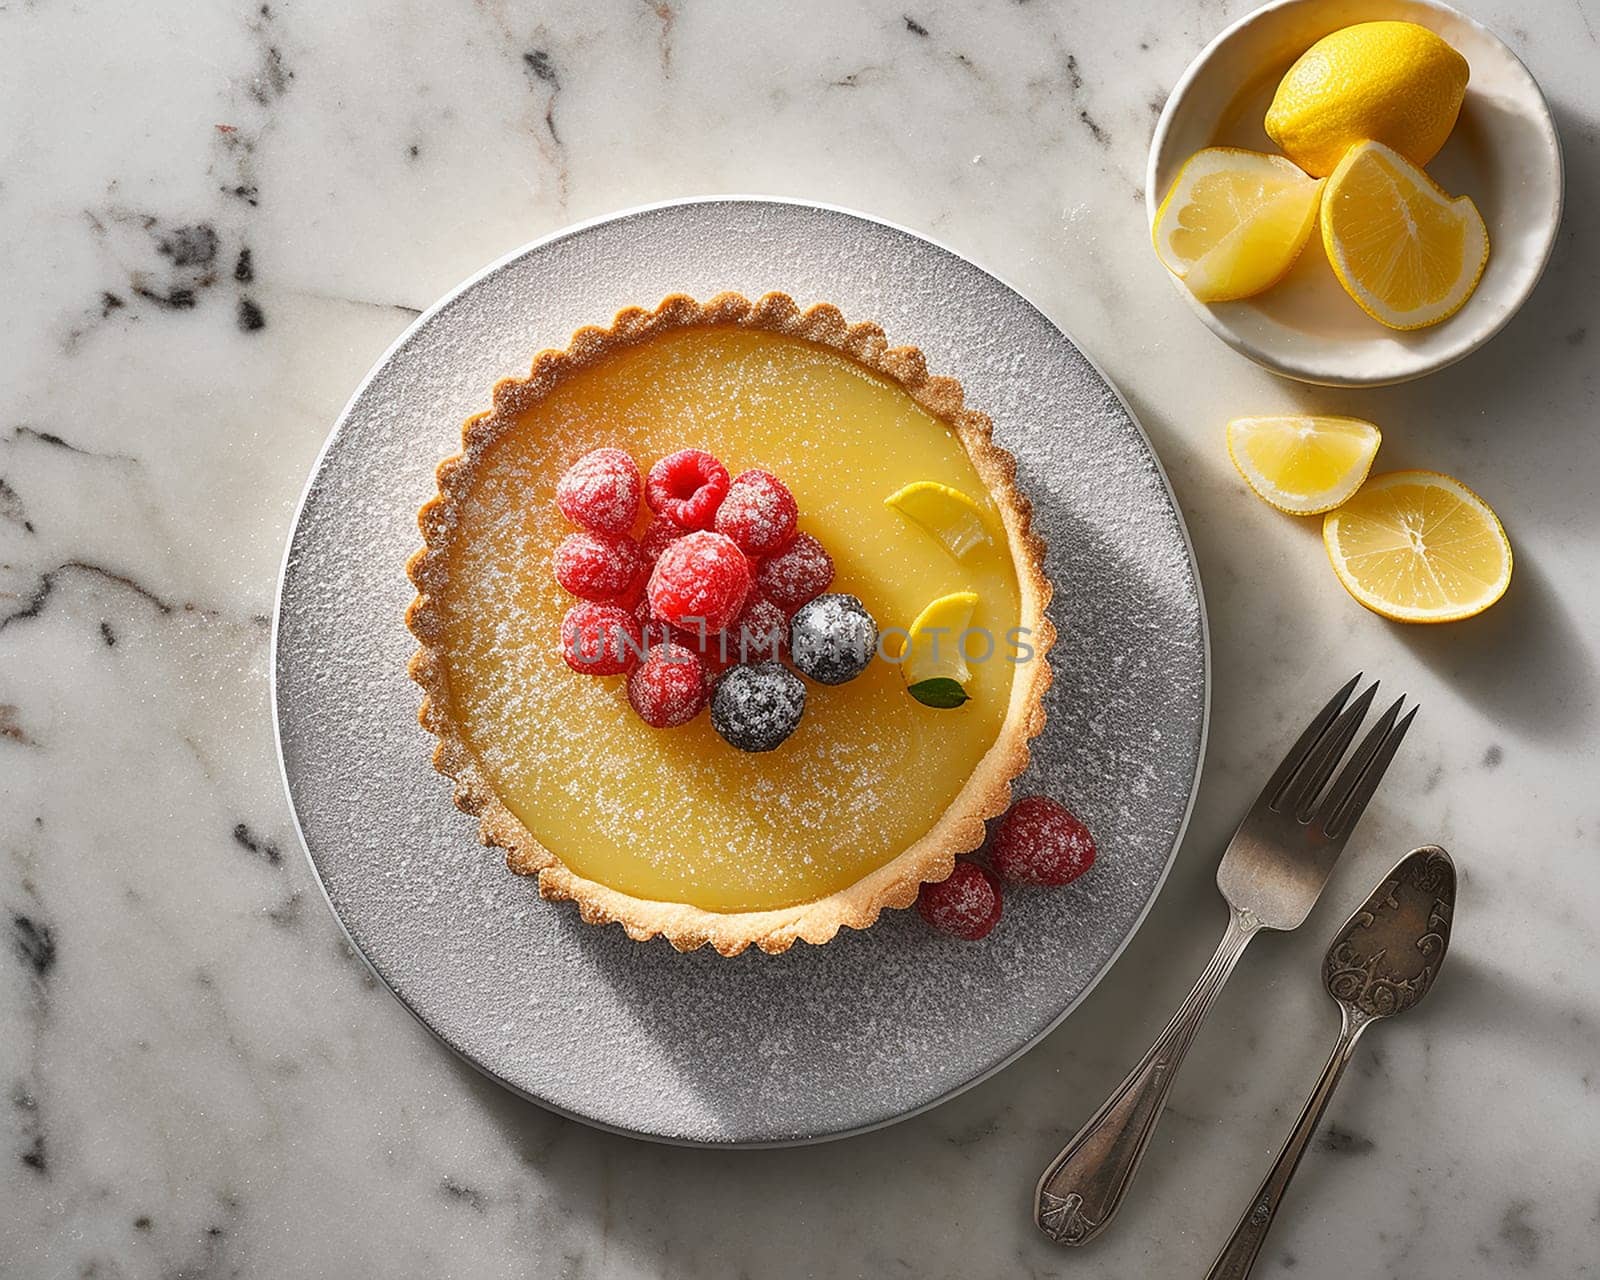 Citrus tart topped with fresh raspberries and dusted with powdered sugar on marble surface.